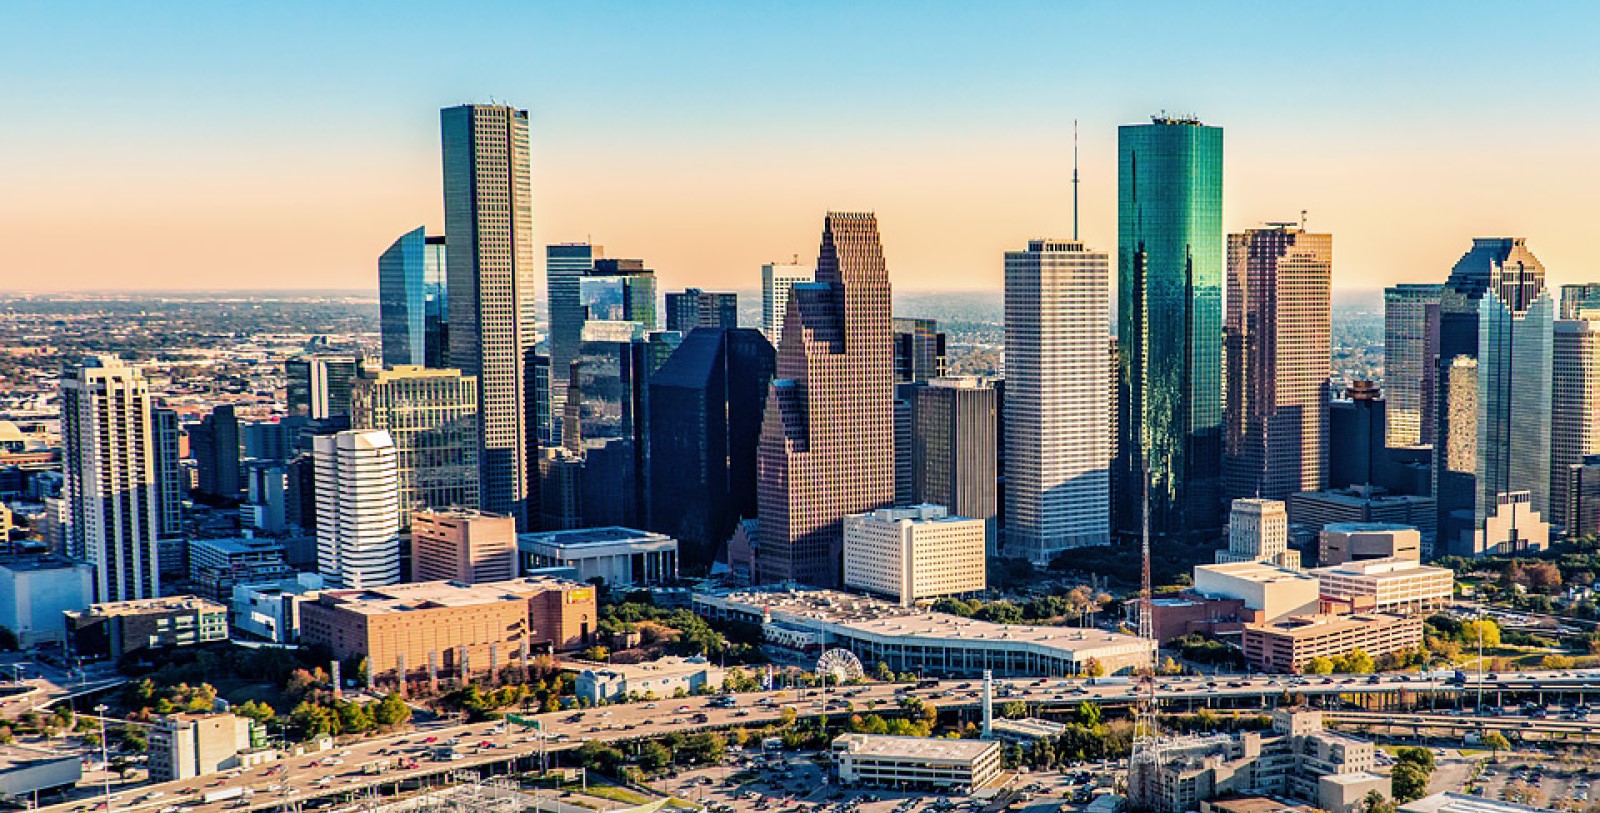 Explore Sam Houston Park, the Museum of Fine Arts, the Downtown Aquarium, and the Houston Theater District several blocks away.